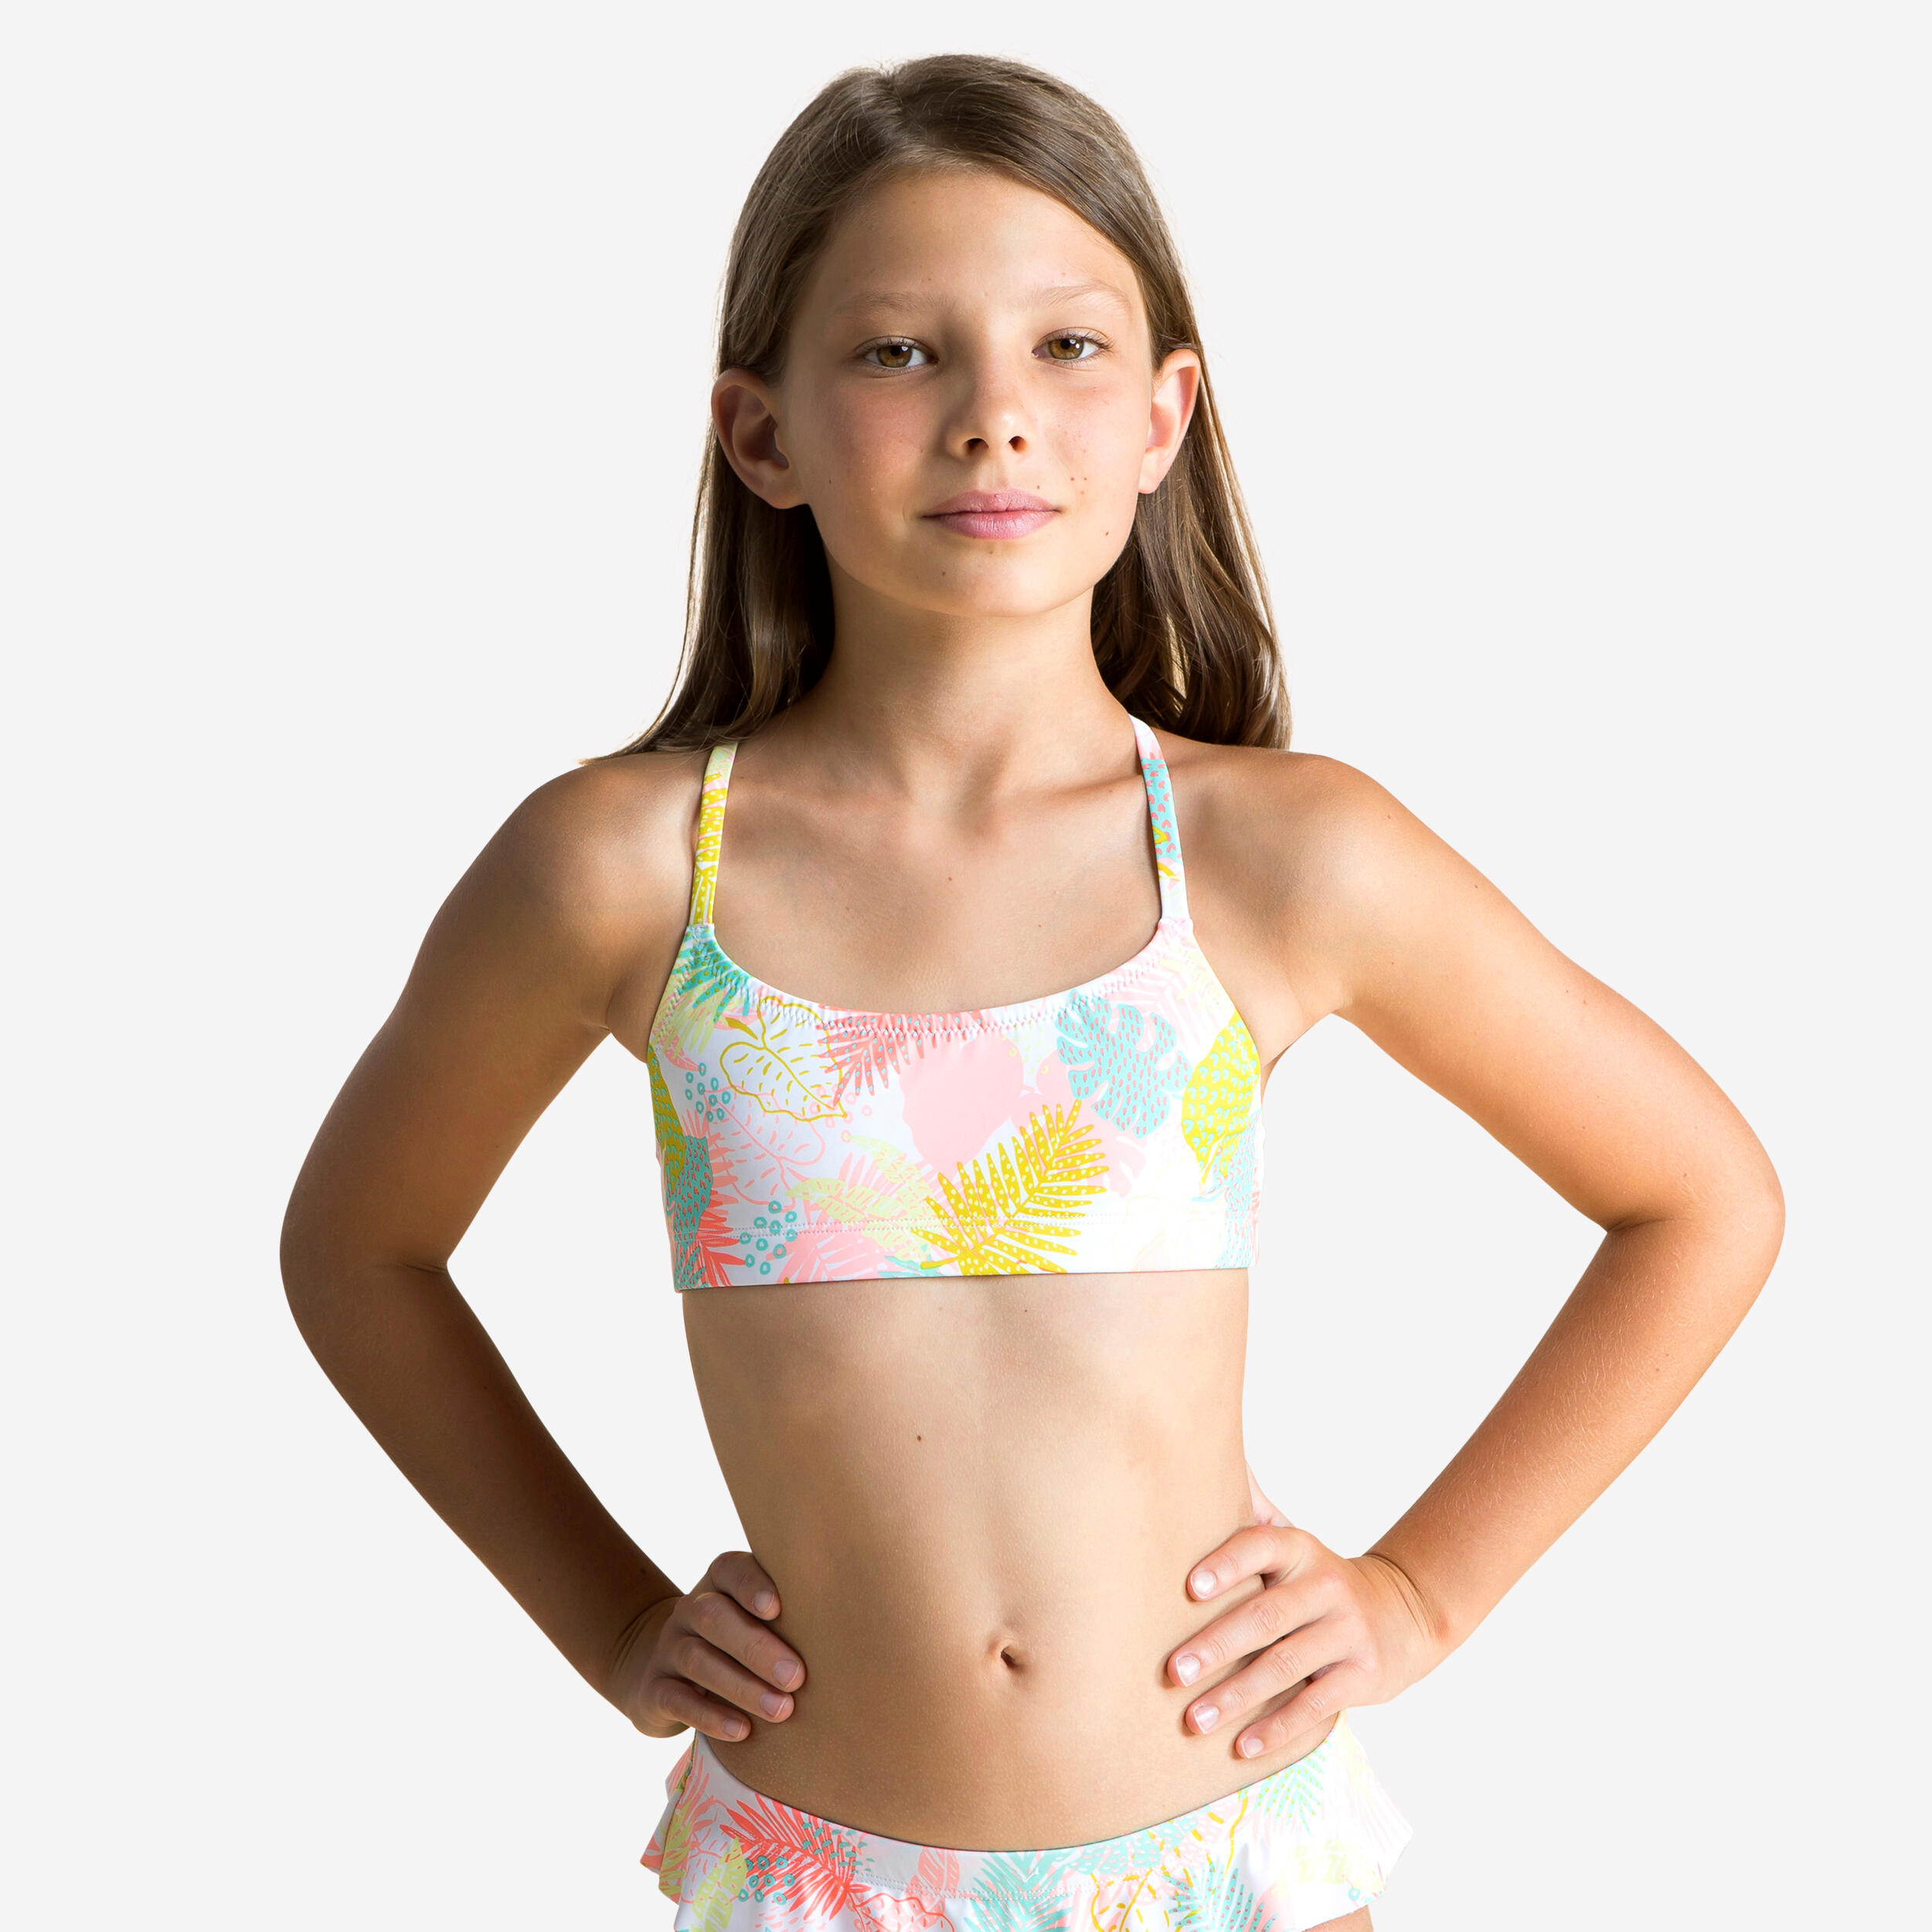 Girls Swimming swimsuit top - Lila Marg red